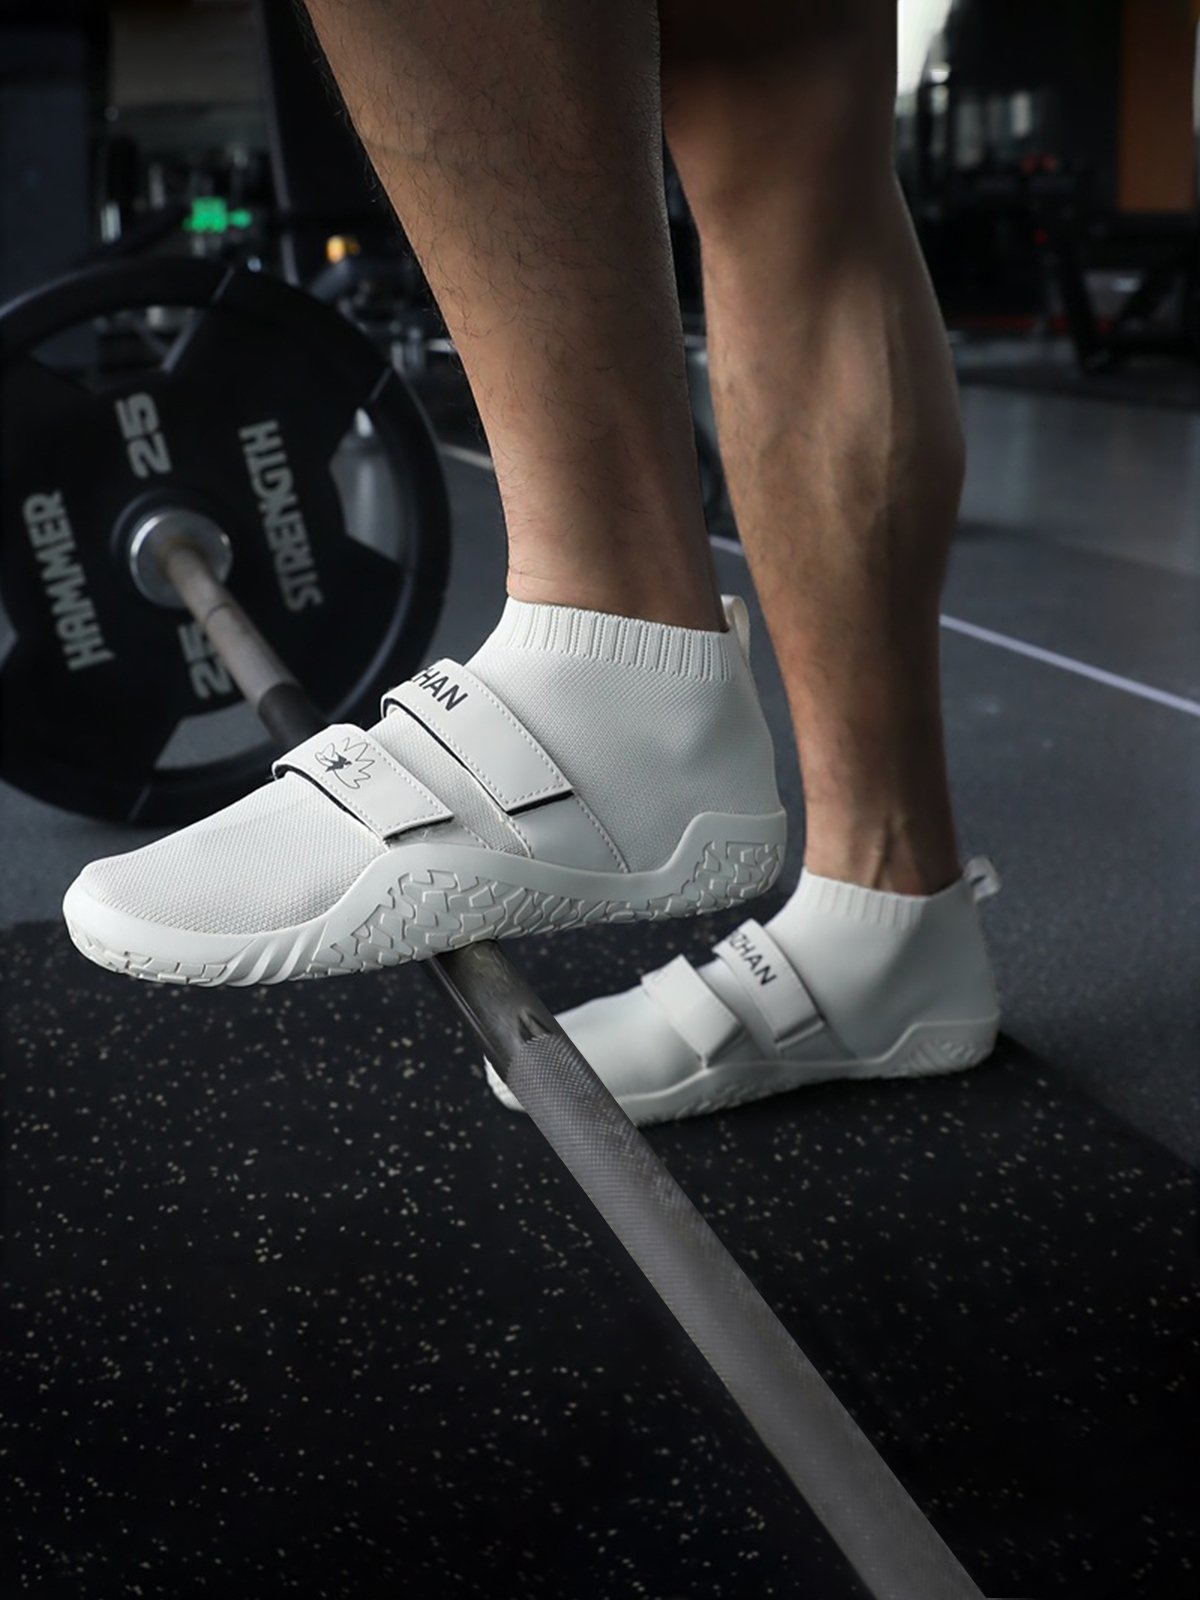 Barefoot Trainers Deadlift Squat Shoe Gym | Ahaselected